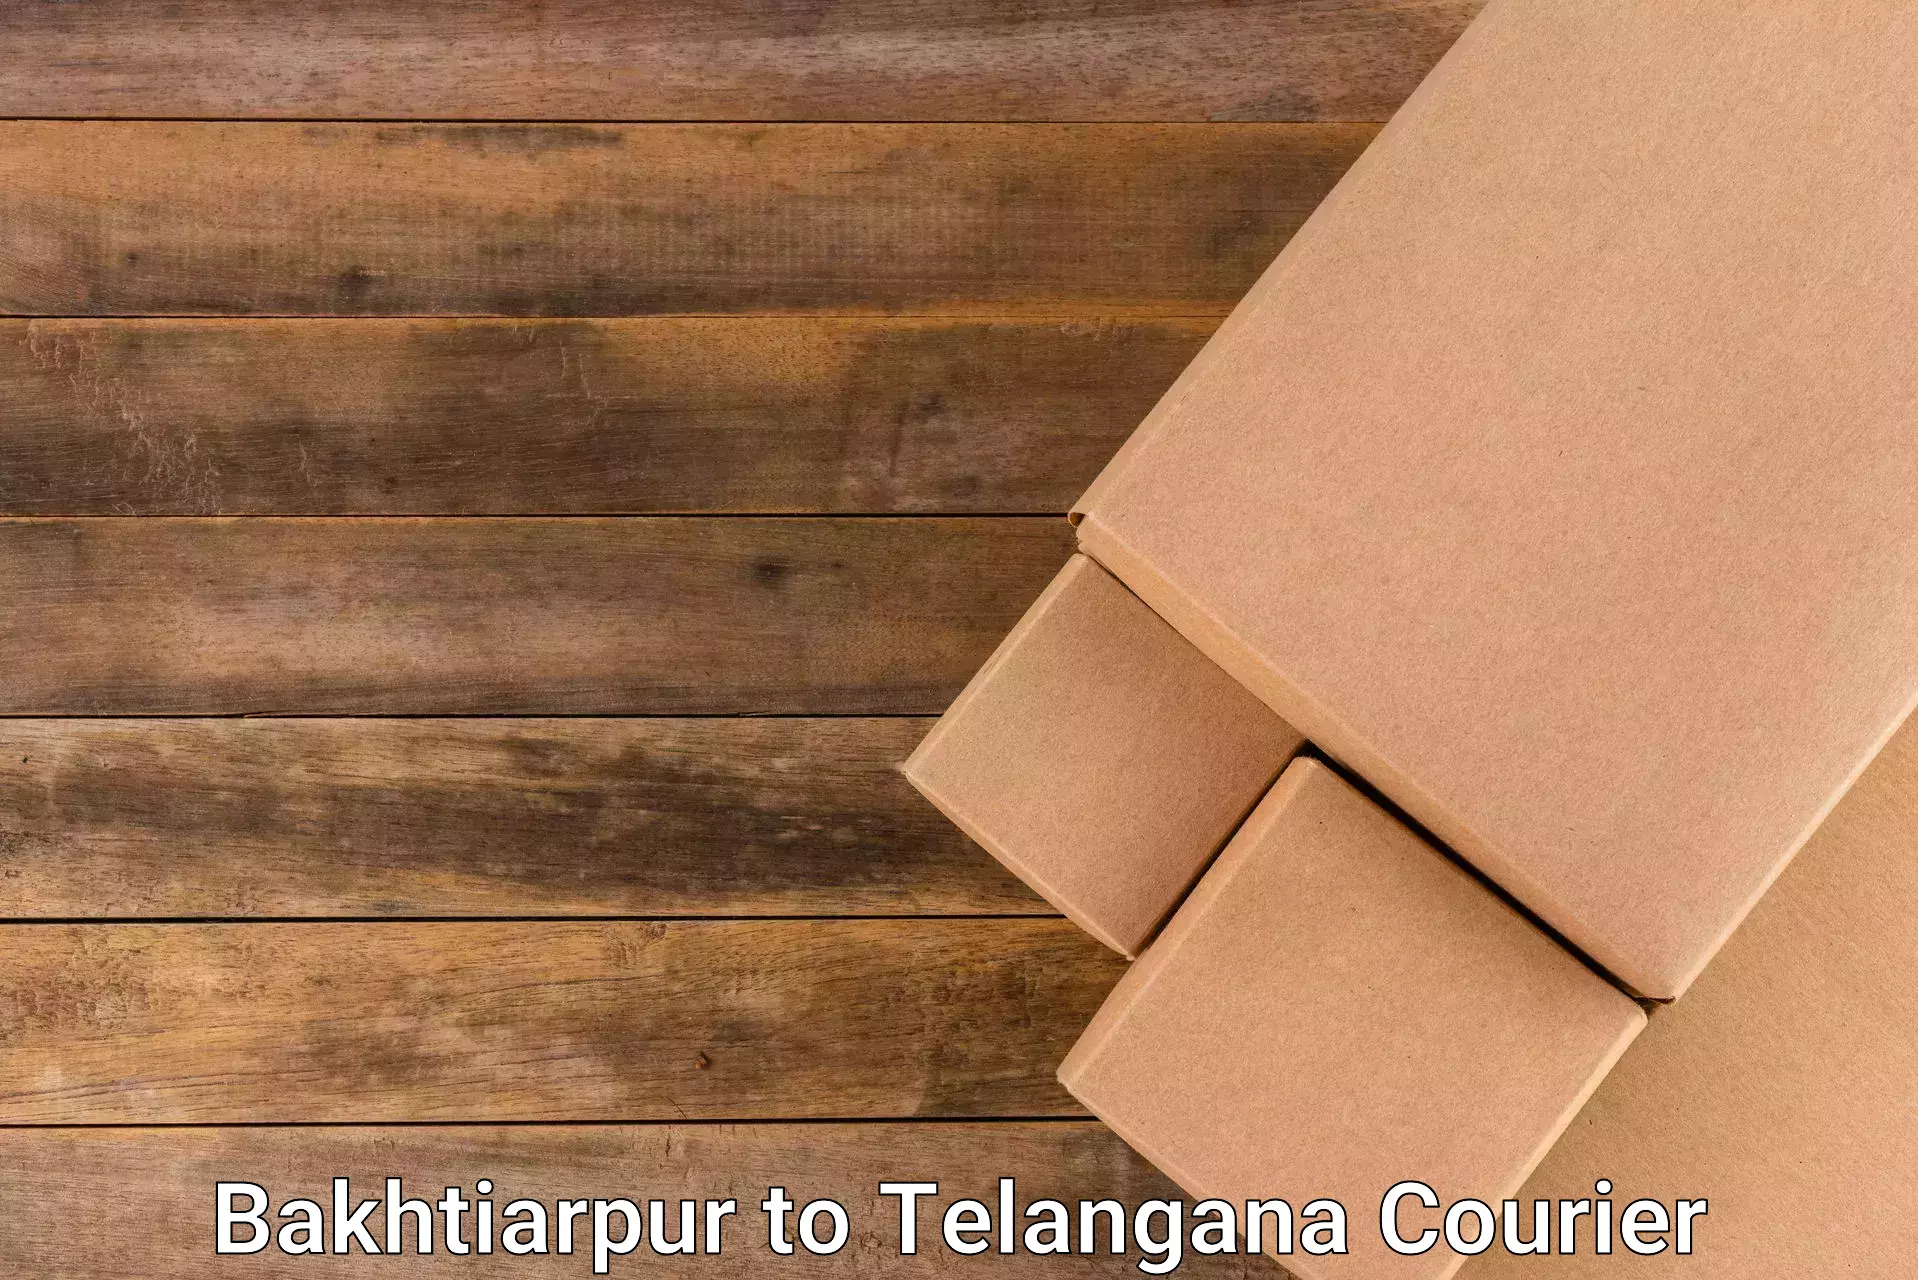 Quality courier services in Bakhtiarpur to Professor Jayashankar Telangana State Agricultural University Hyderabad